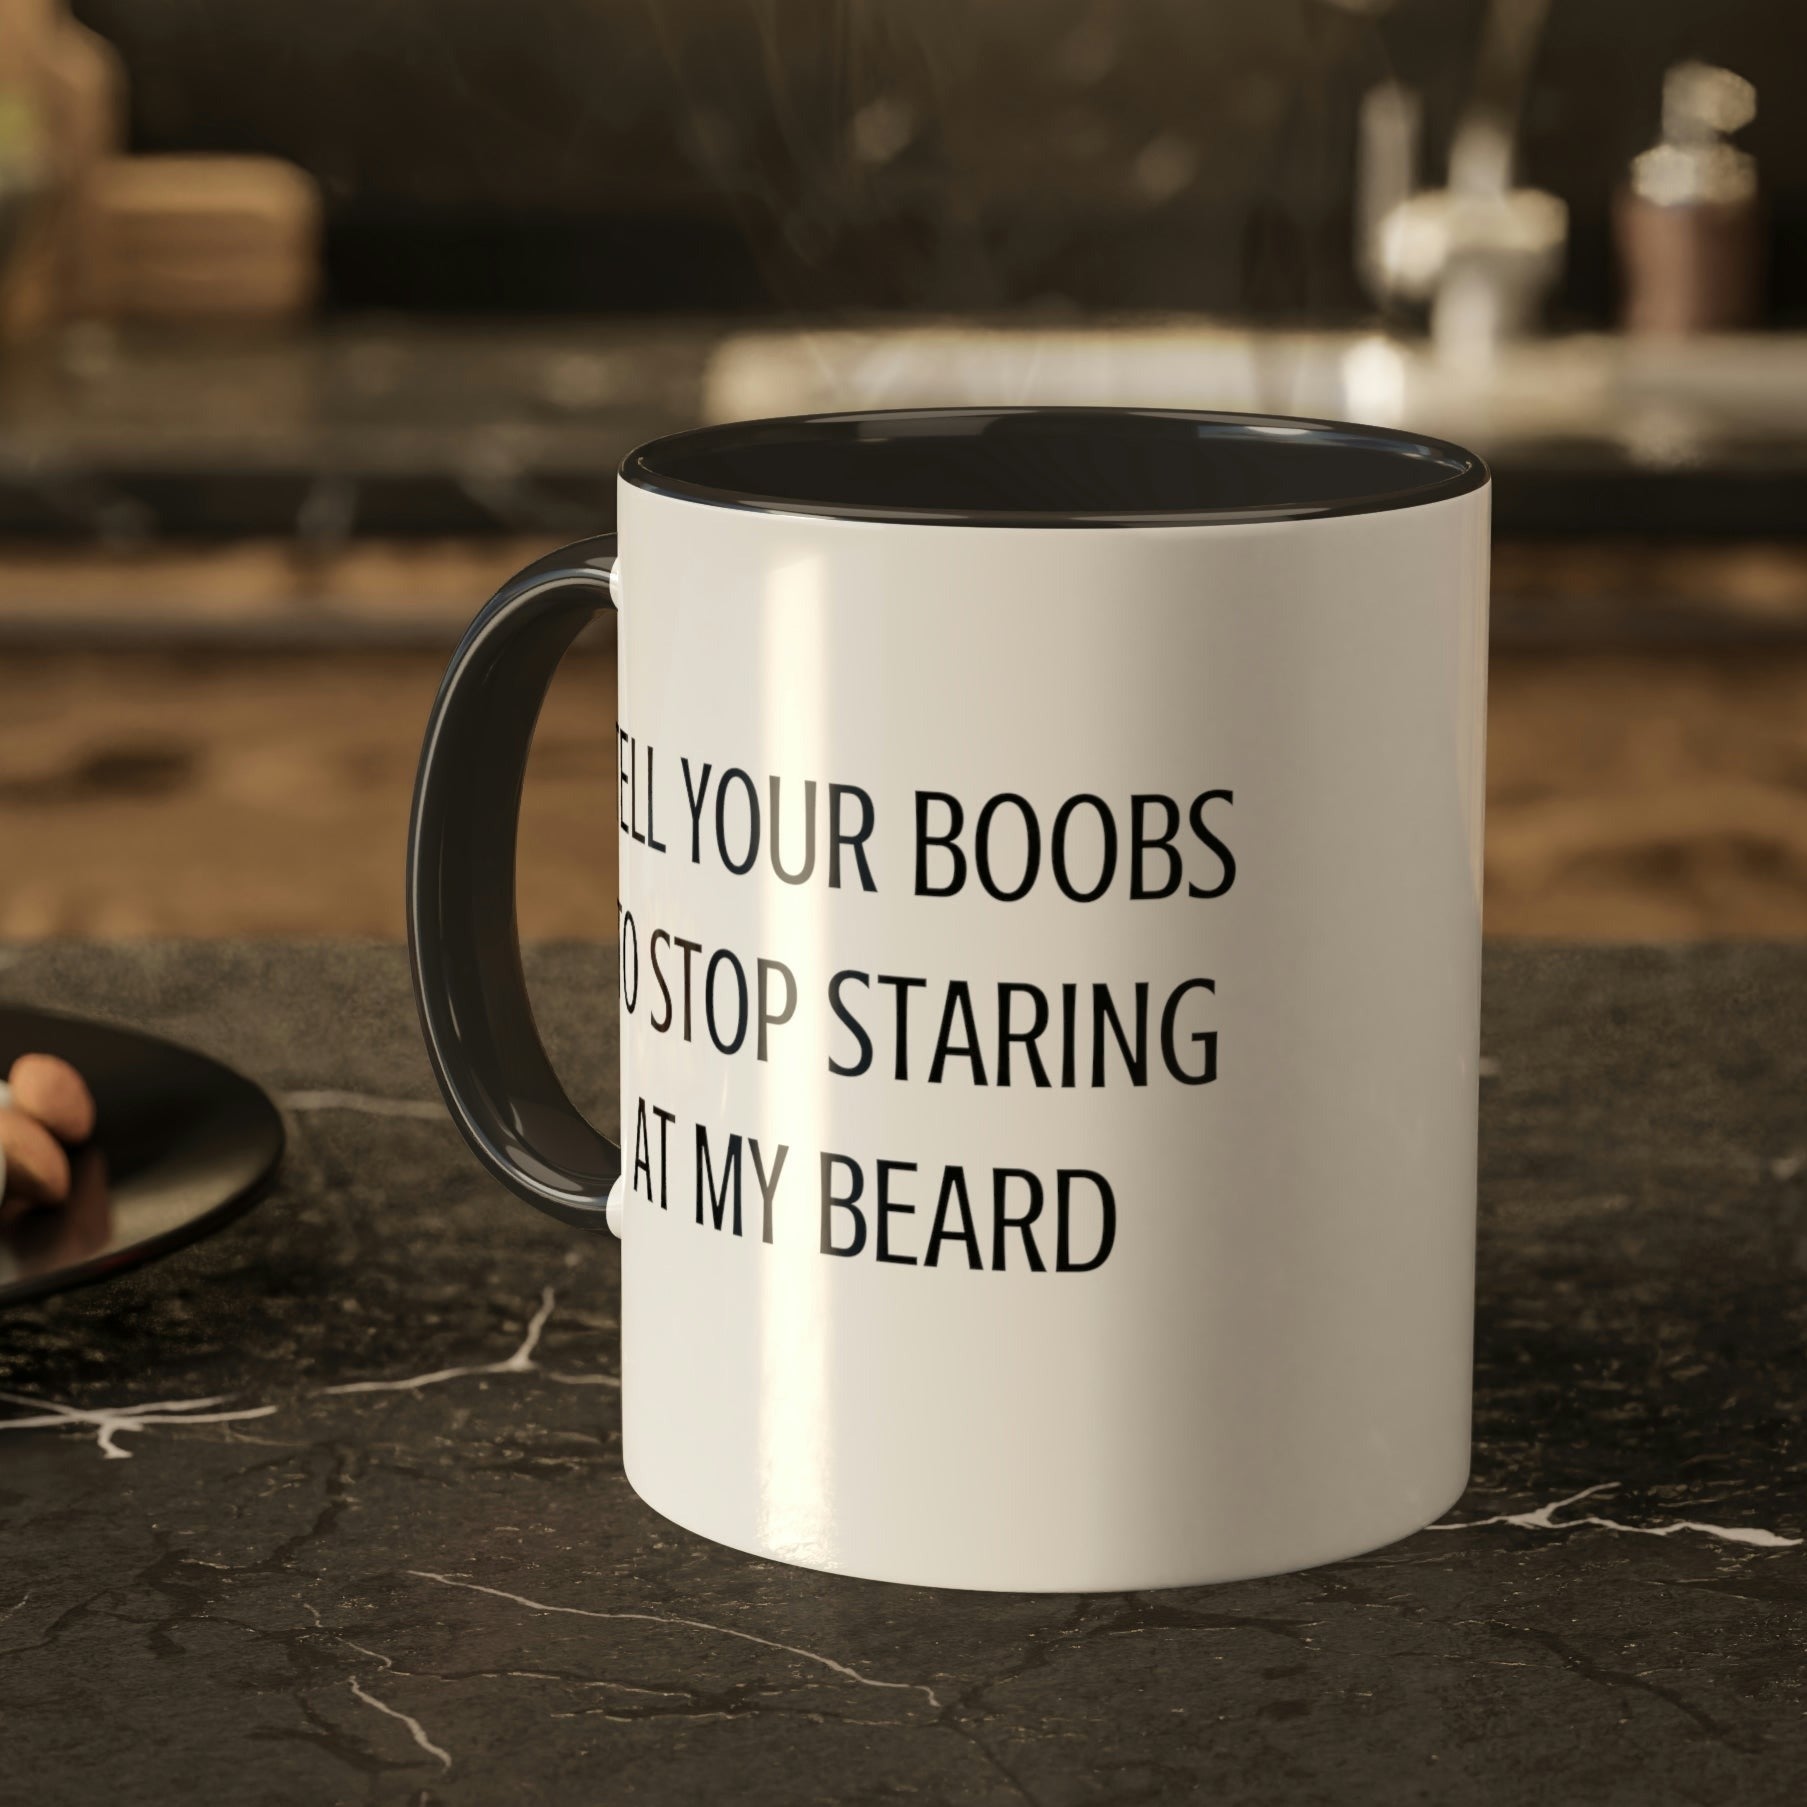    tell-your-boobs-to-stop-staring-at-my-beard-glossy-mug-11-oz-coffee-funny-mockup-on-a-wooden-table